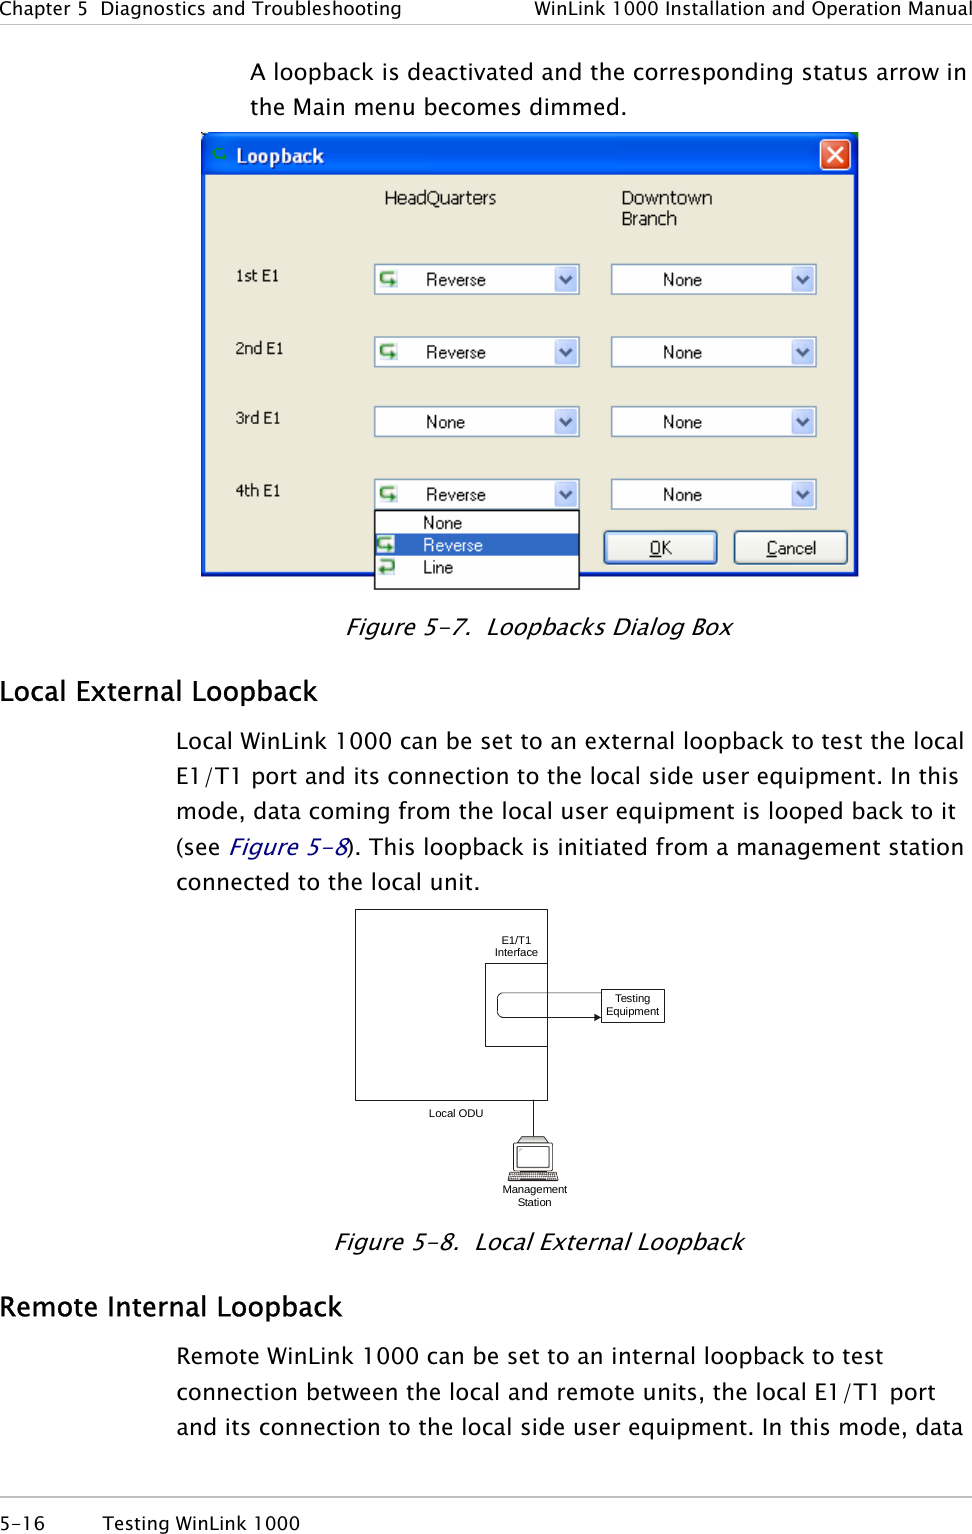 Chapter  5  Diagnostics and Troubleshooting  WinLink 1000 Installation and Operation Manual A loopback is deactivated and the corresponding status arrow in the Main menu becomes dimmed.  Figure  5-7.  Loopbacks Dialog Box Local External Loopback Local WinLink 1000 can be set to an external loopback to test the local E1/T1 port and its connection to the local side user equipment. In this mode, data coming from the local user equipment is looped back to it (see Figure  5-8). This loopback is initiated from a management station connected to the local unit. Tes ti ng  Equipment Management StationE1Interface/T1Local ODU Figure  5-8.  Local External Loopback Remote Internal Loopback Remote WinLink 1000 can be set to an internal loopback to test connection between the local and remote units, the local E1/T1 port and its connection to the local side user equipment. In this mode, data 5-16  Testing WinLink 1000  